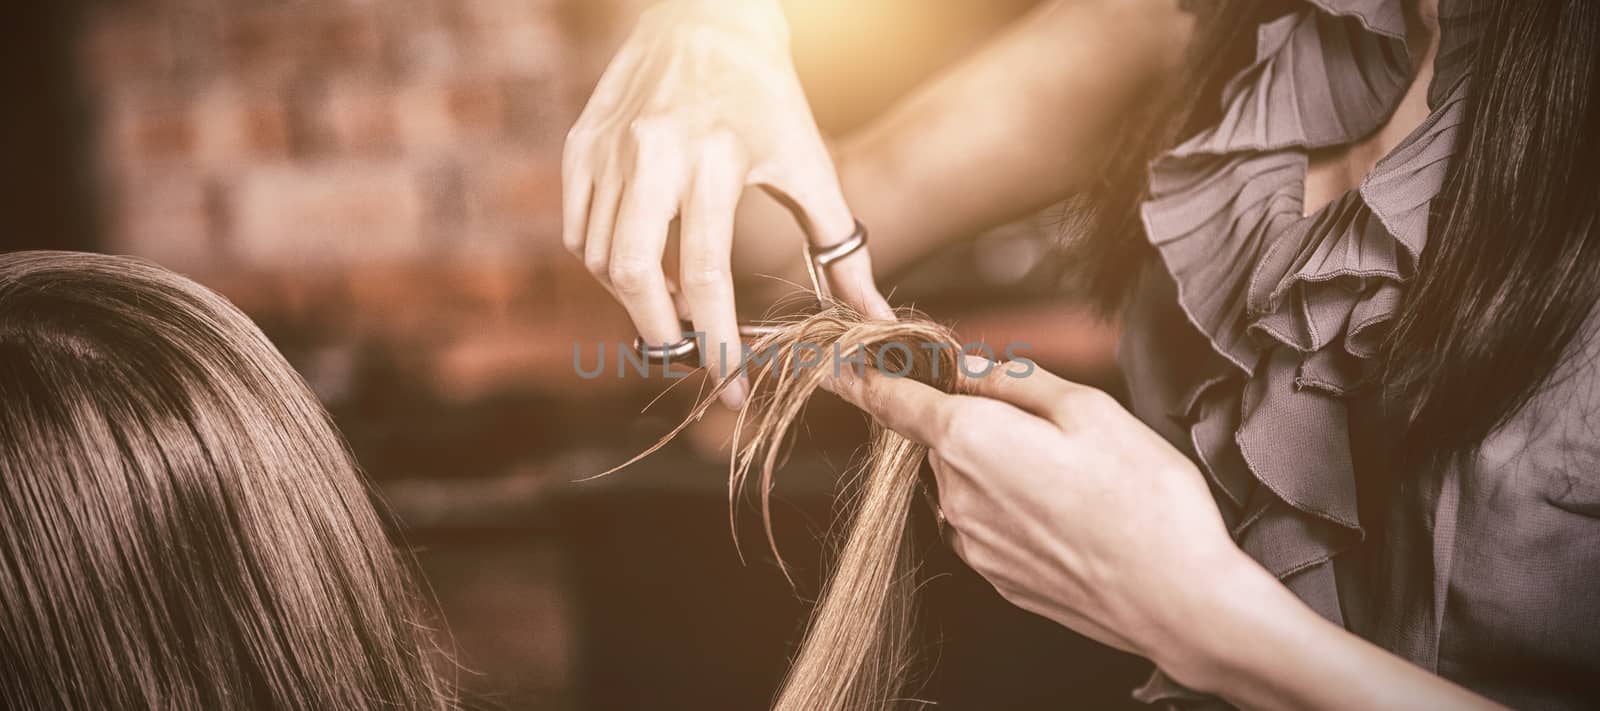 Female getting her hair trimmed at a salon